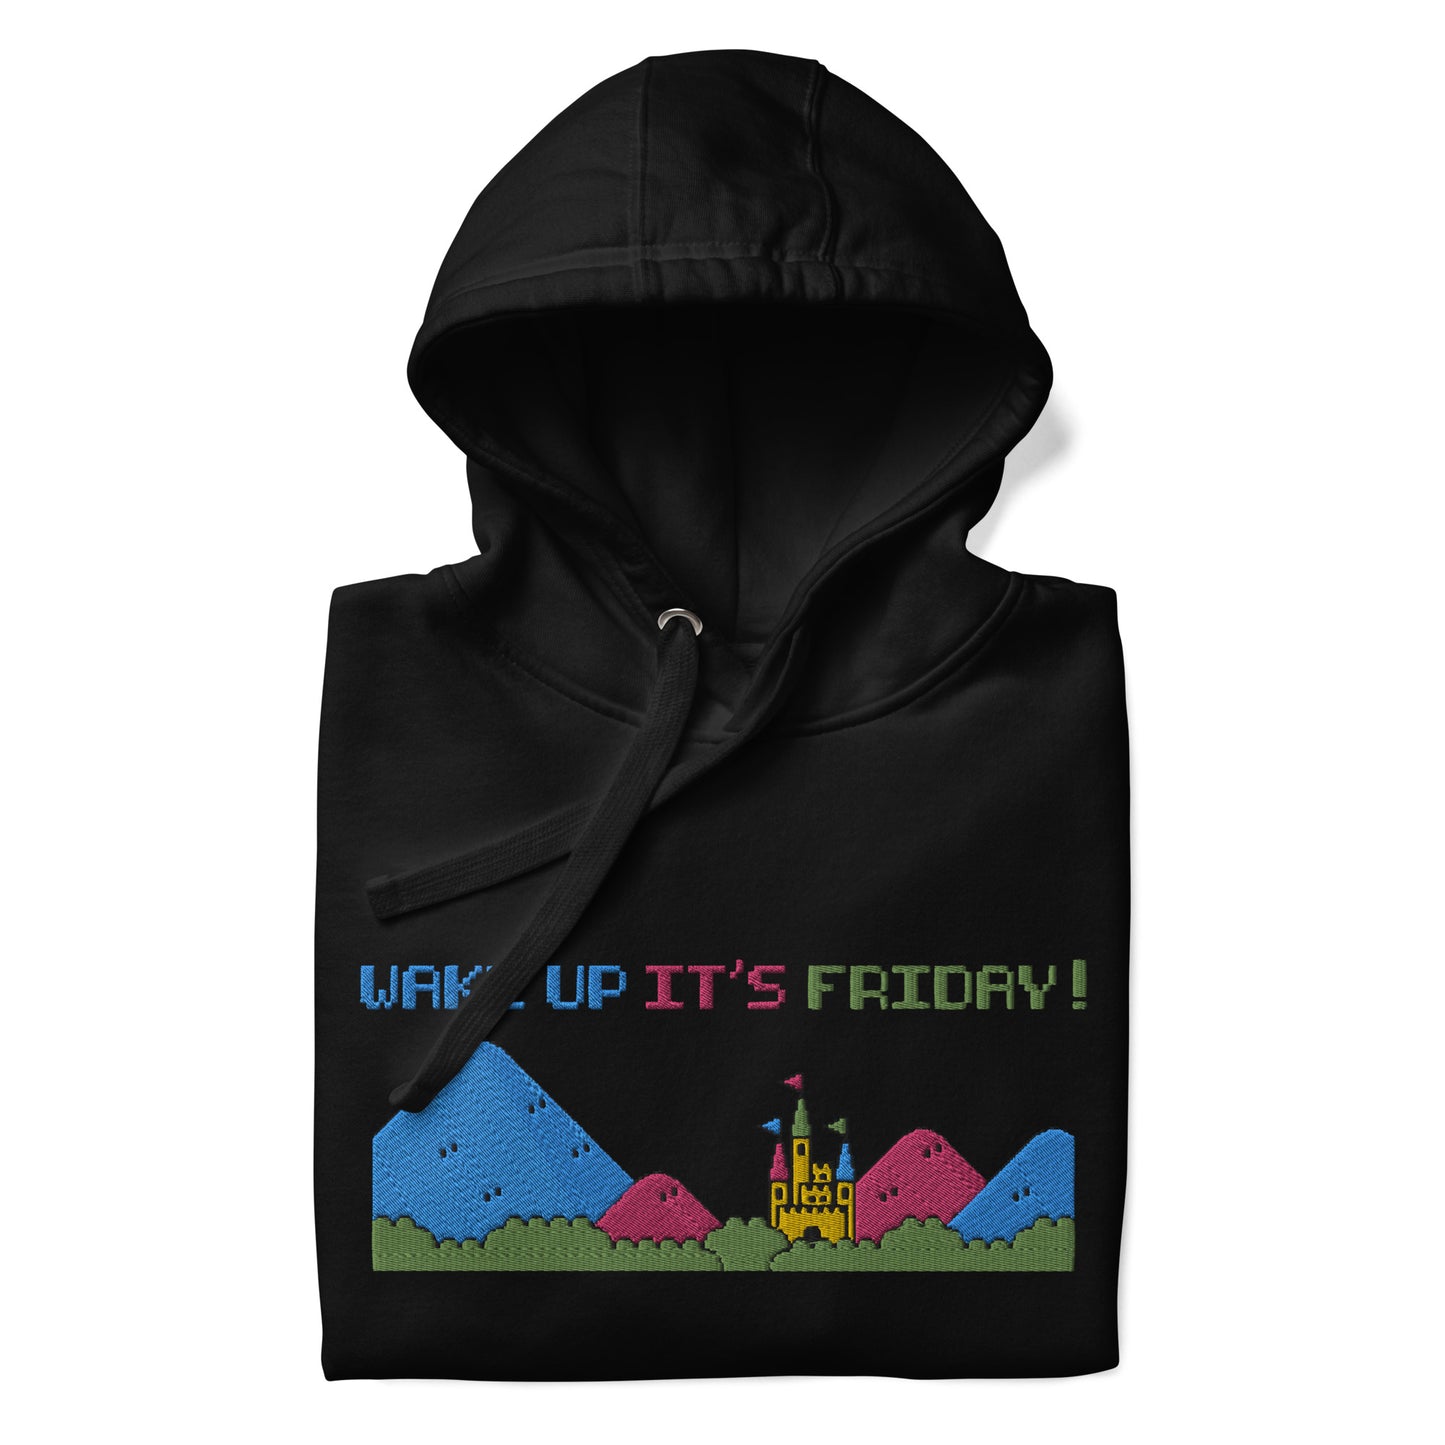 Embroidered Large Center, Unisex Hoodie / Hooded Sweatshirt "Wake Up, It's Friday"